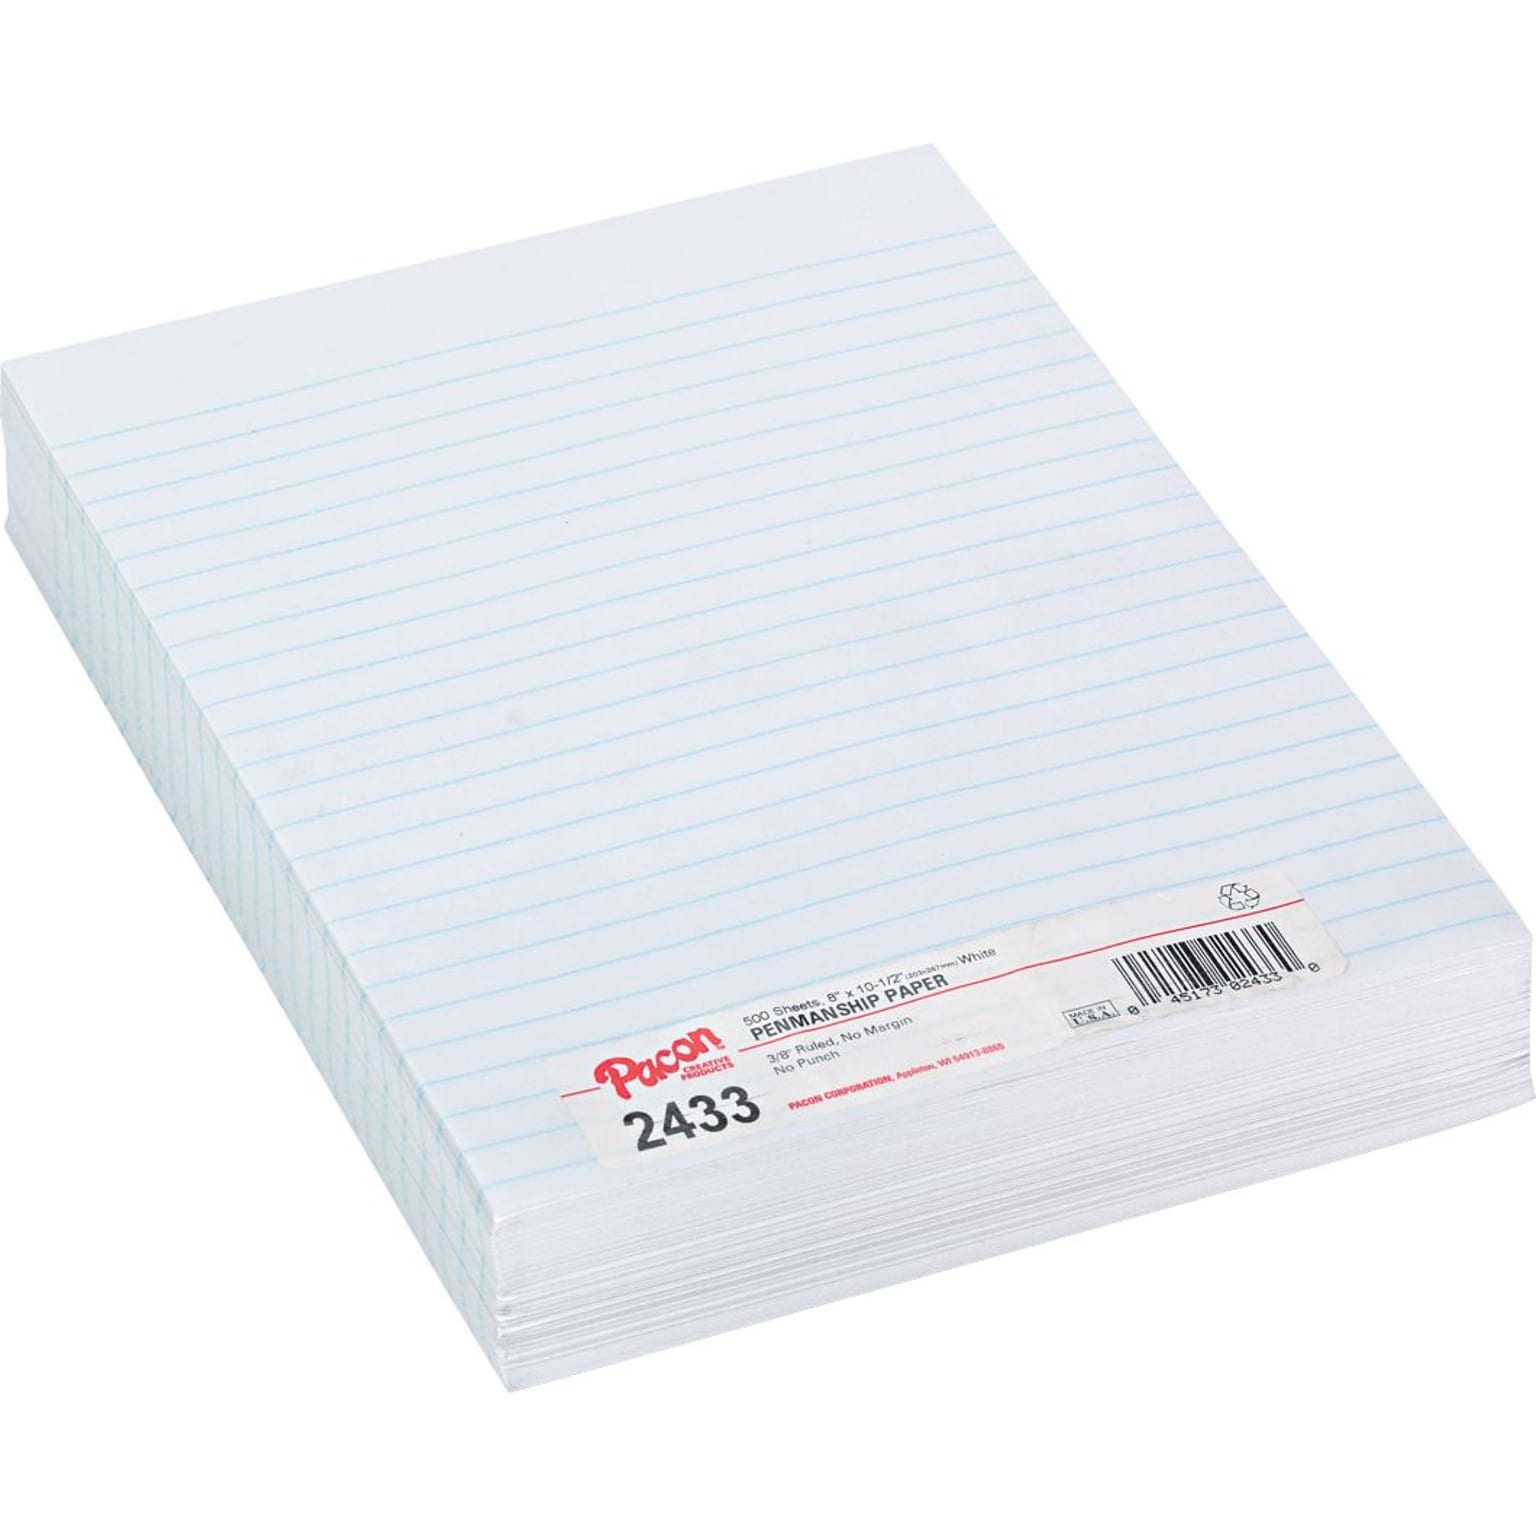 Pacon 10-1/2 x 8 Essay and Composition Loose Leaf Paper, 3/8 Ruled without Margin, White, 500 Sheets/Pack (PAC2433)